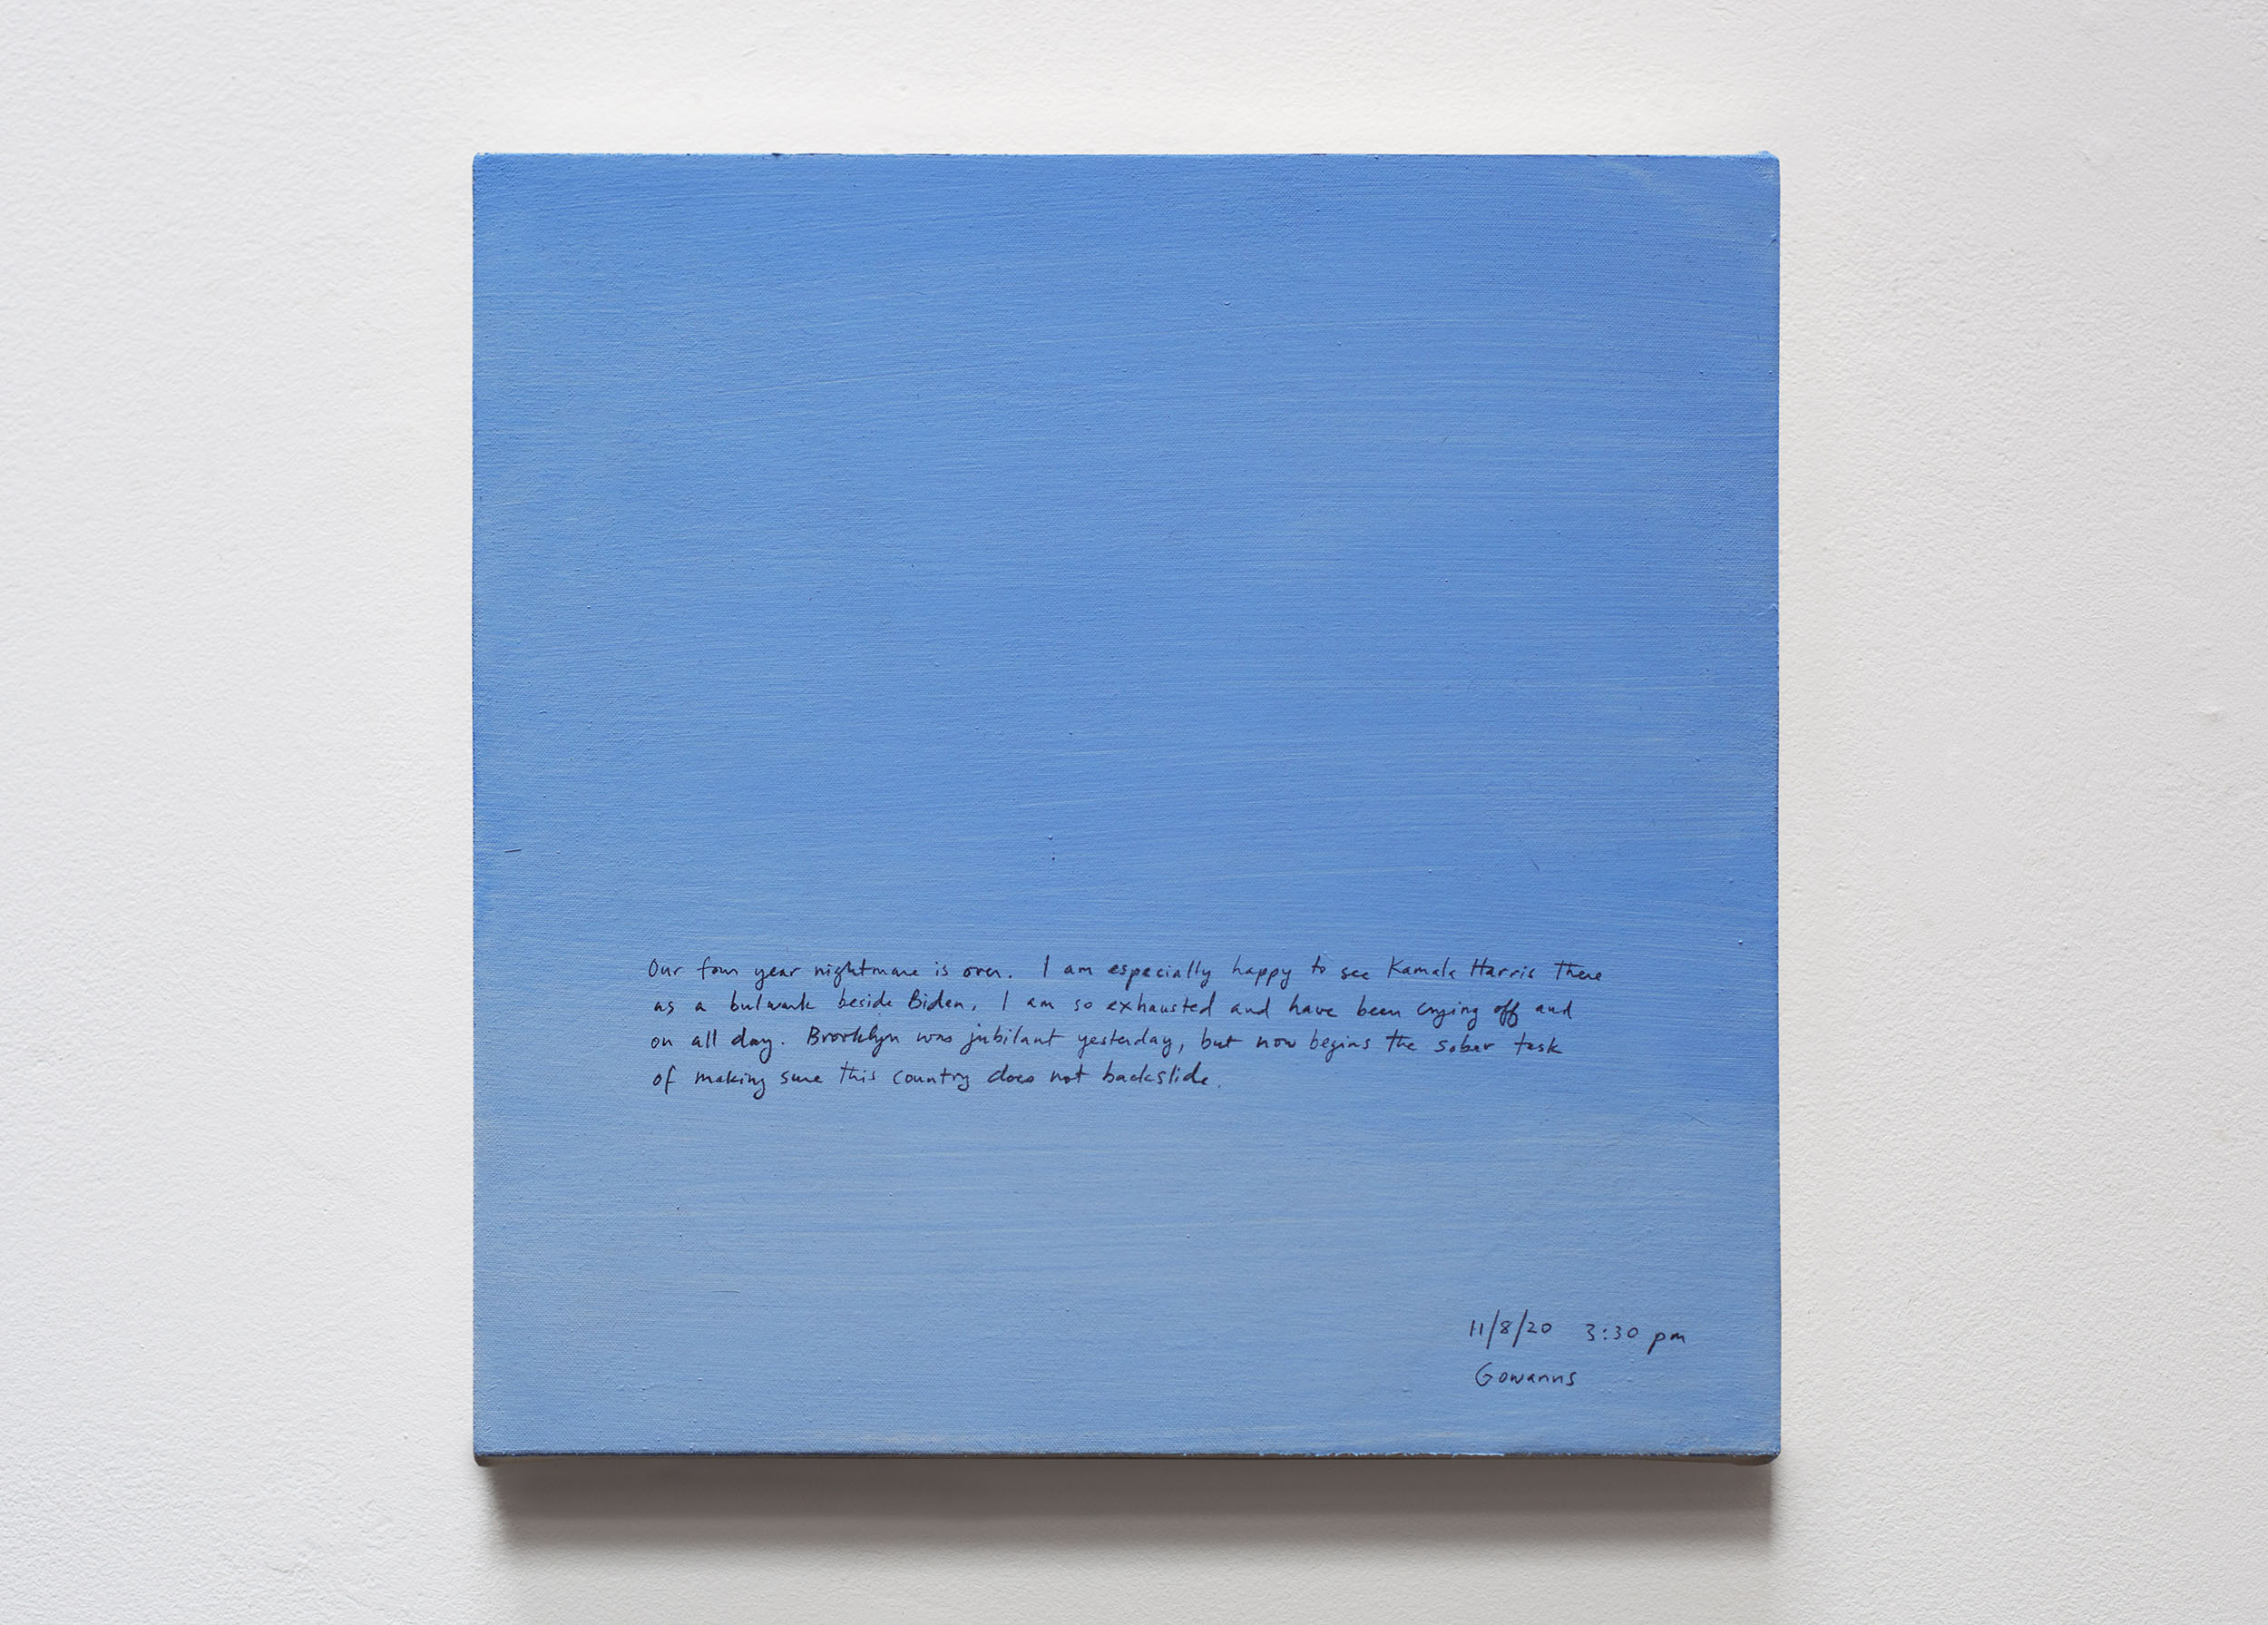 A 14 × 14 inch, acrylic painting of the sky. A journal entry is handwritten on the painting:

“Our four year nightmare is over. I am especially happy to see Kamala Harris there as a bulwark beside Biden. I am so exhausted and have been crying off and on all day. Brooklyn was jubilant yesterday, but now begins the sober task of making sure this country does not backslide.

11/8/20 3:30 pm
Gowanus”